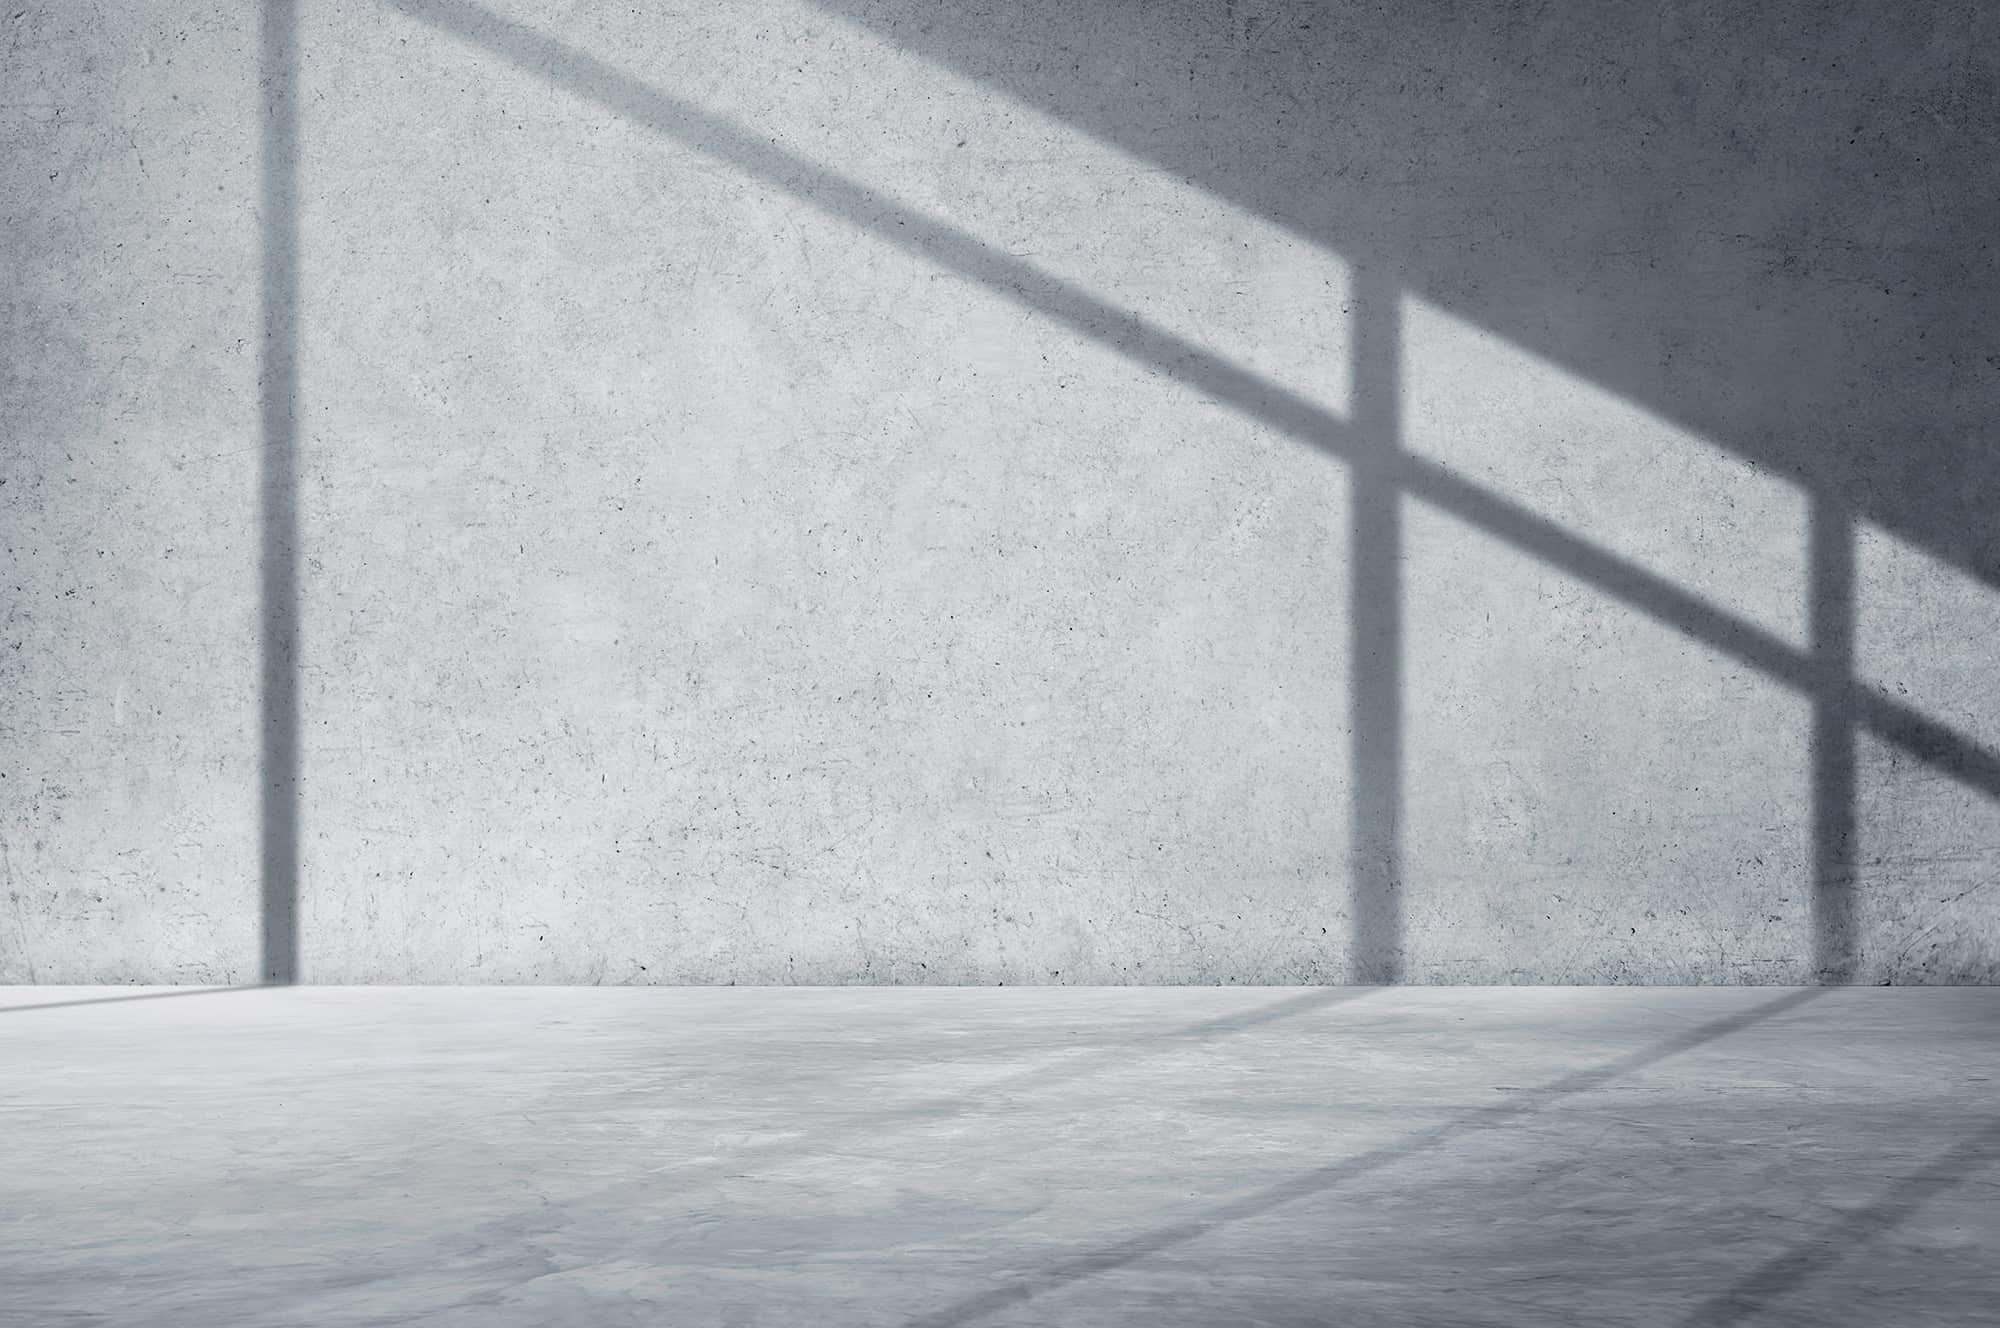 A minimalist interior with concrete walls and floor, featuring shadows cast by an unseen window.